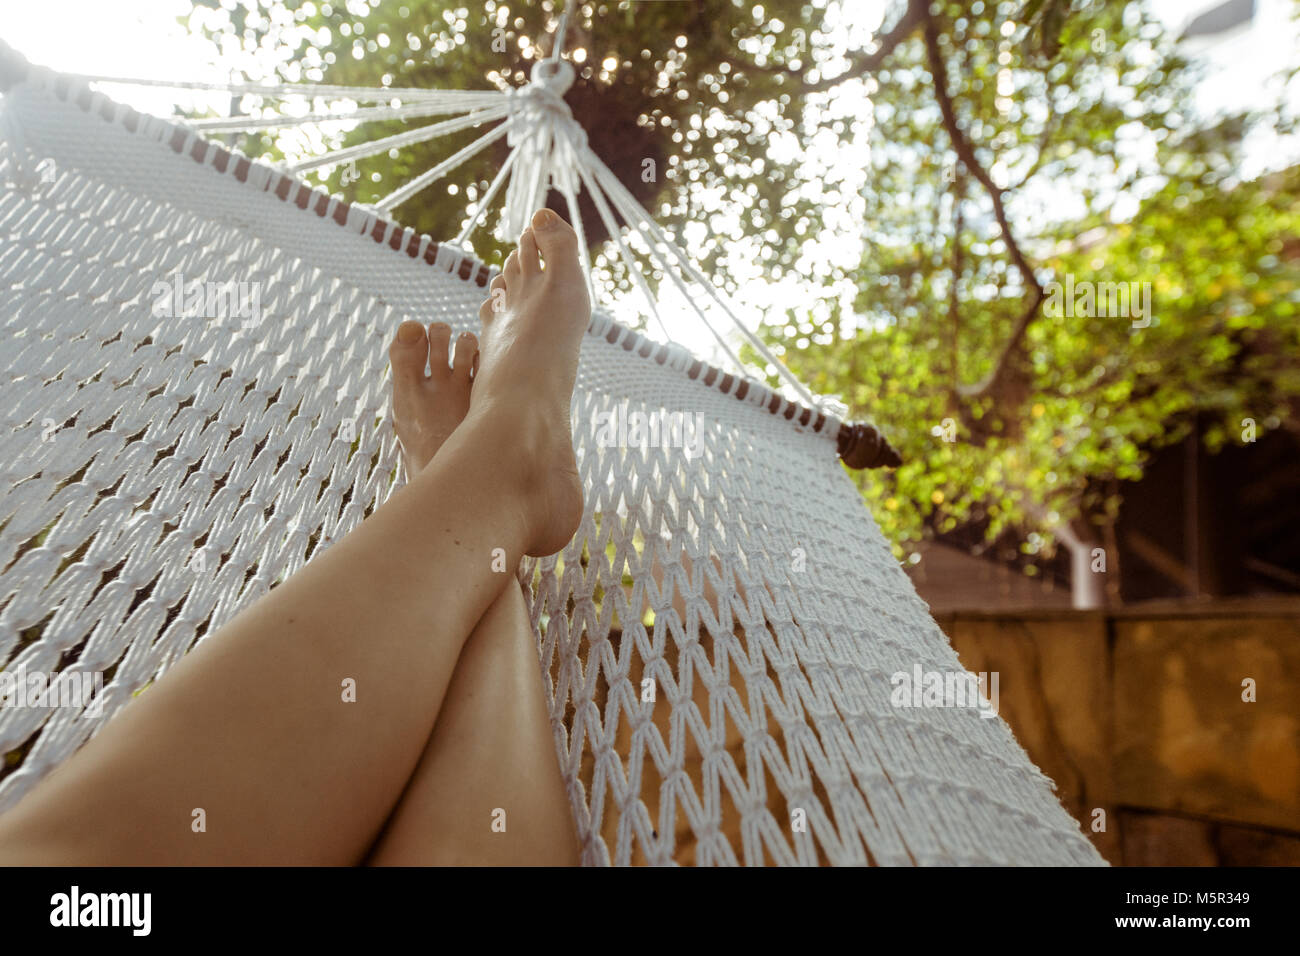 Crop person chilling in hammock Stock Photo